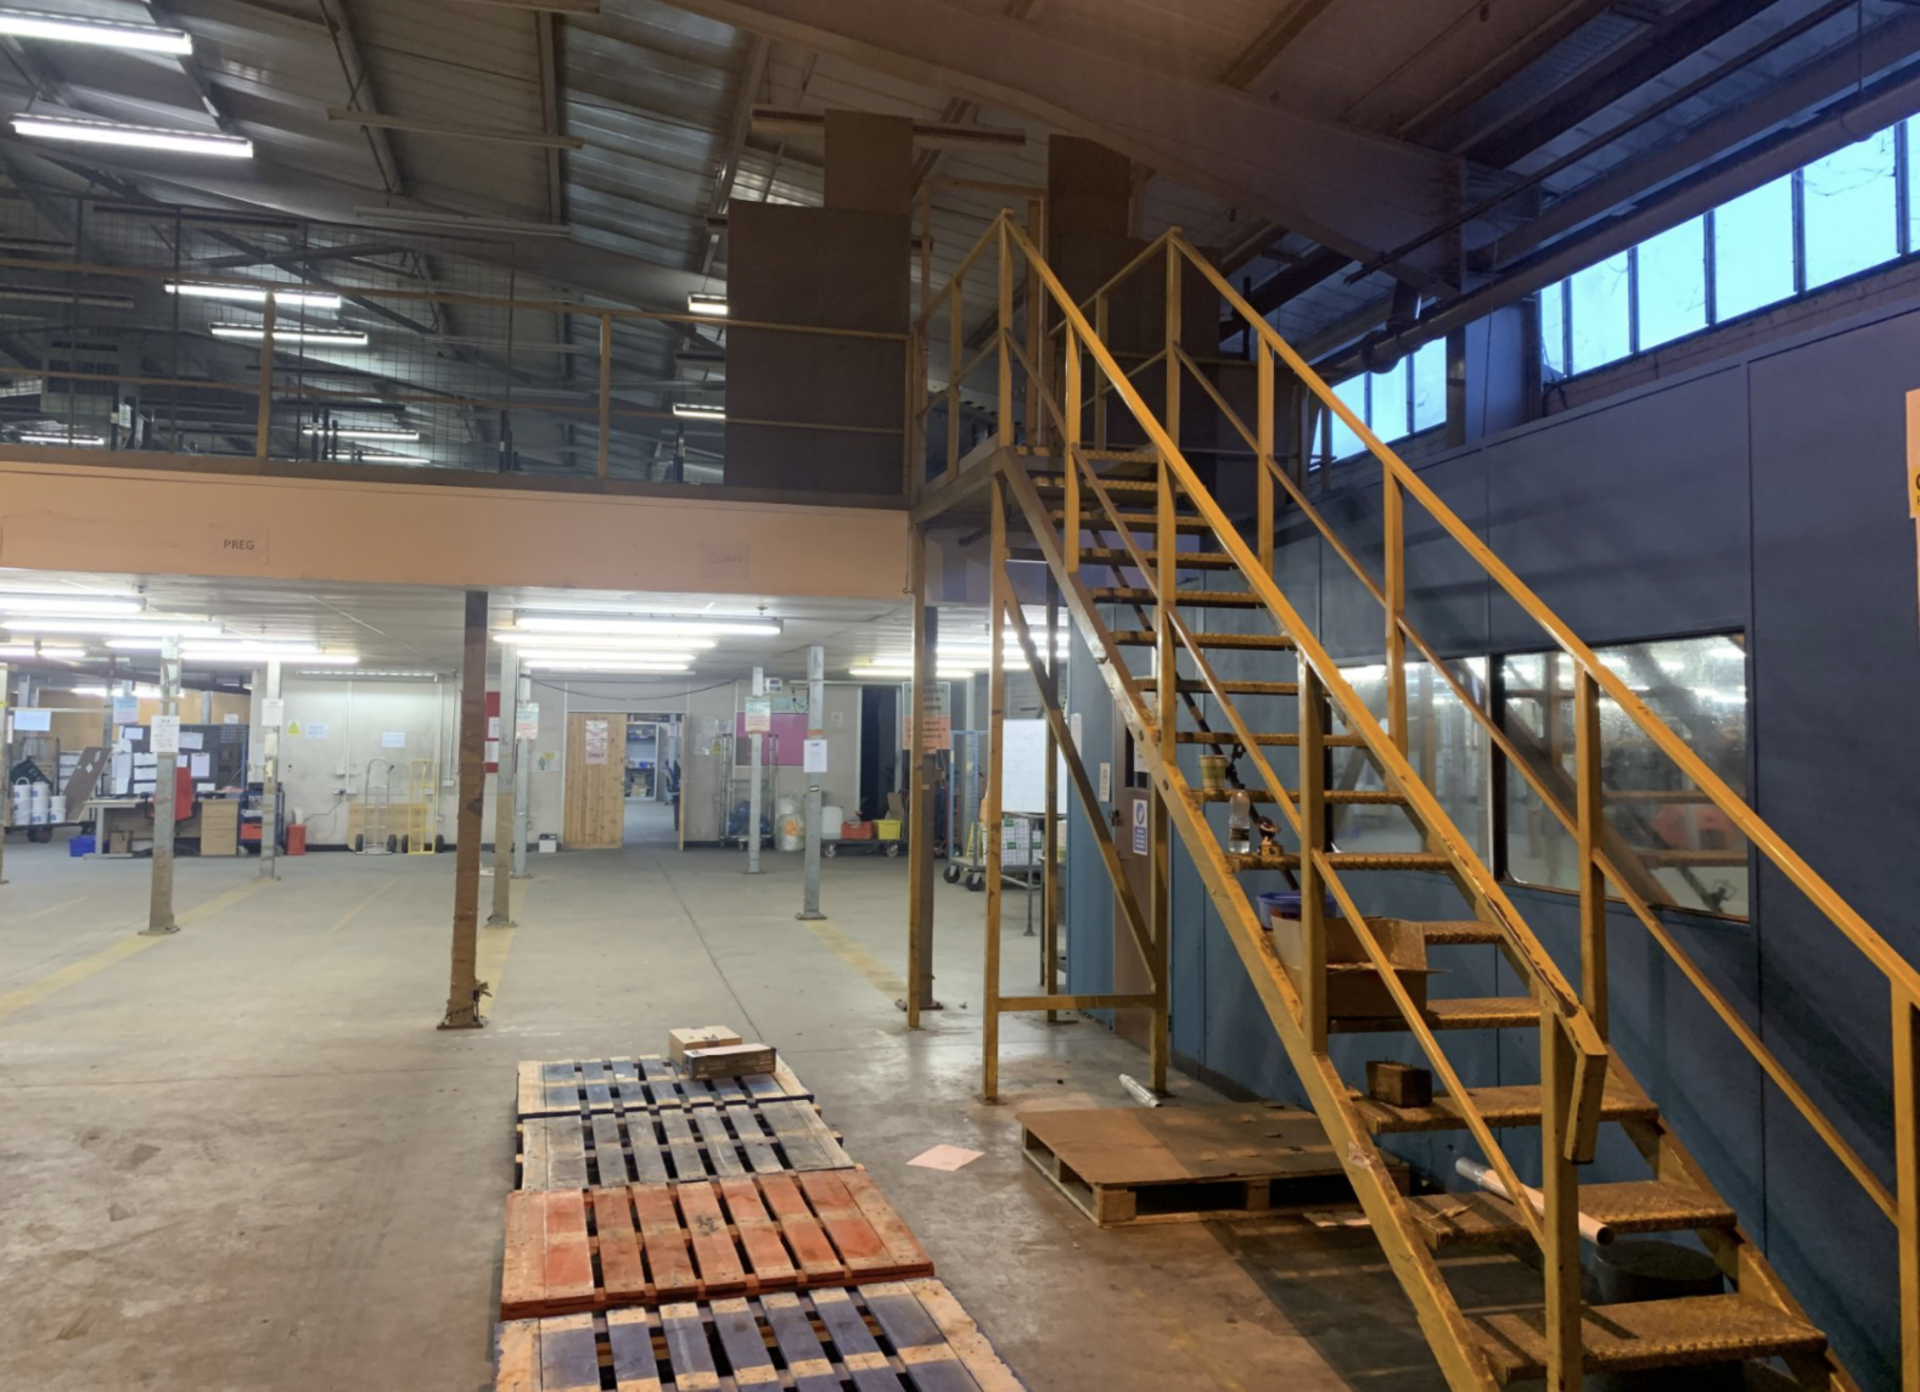 £500,000 MEZZANINE FLOOR 80m x 28m 3 stairs and loading bay inc - Image 13 of 21